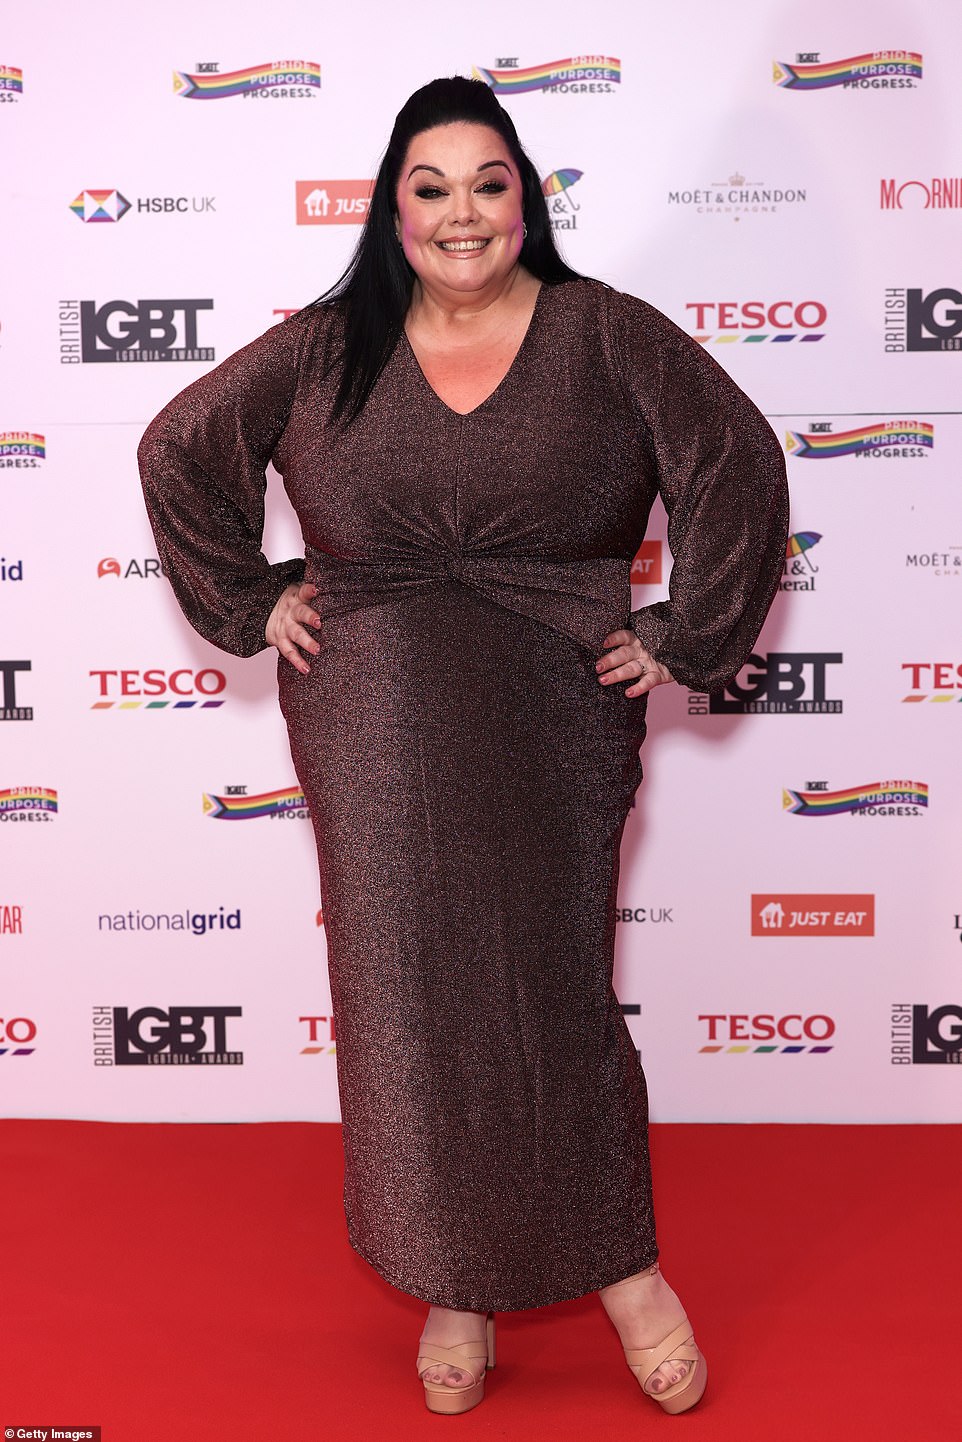 In an emotional moment, former Strictly Come Dancing star Robin Windsor was honored with a special posthumous award, with Lisa Riley (pictured) accepting on his behalf